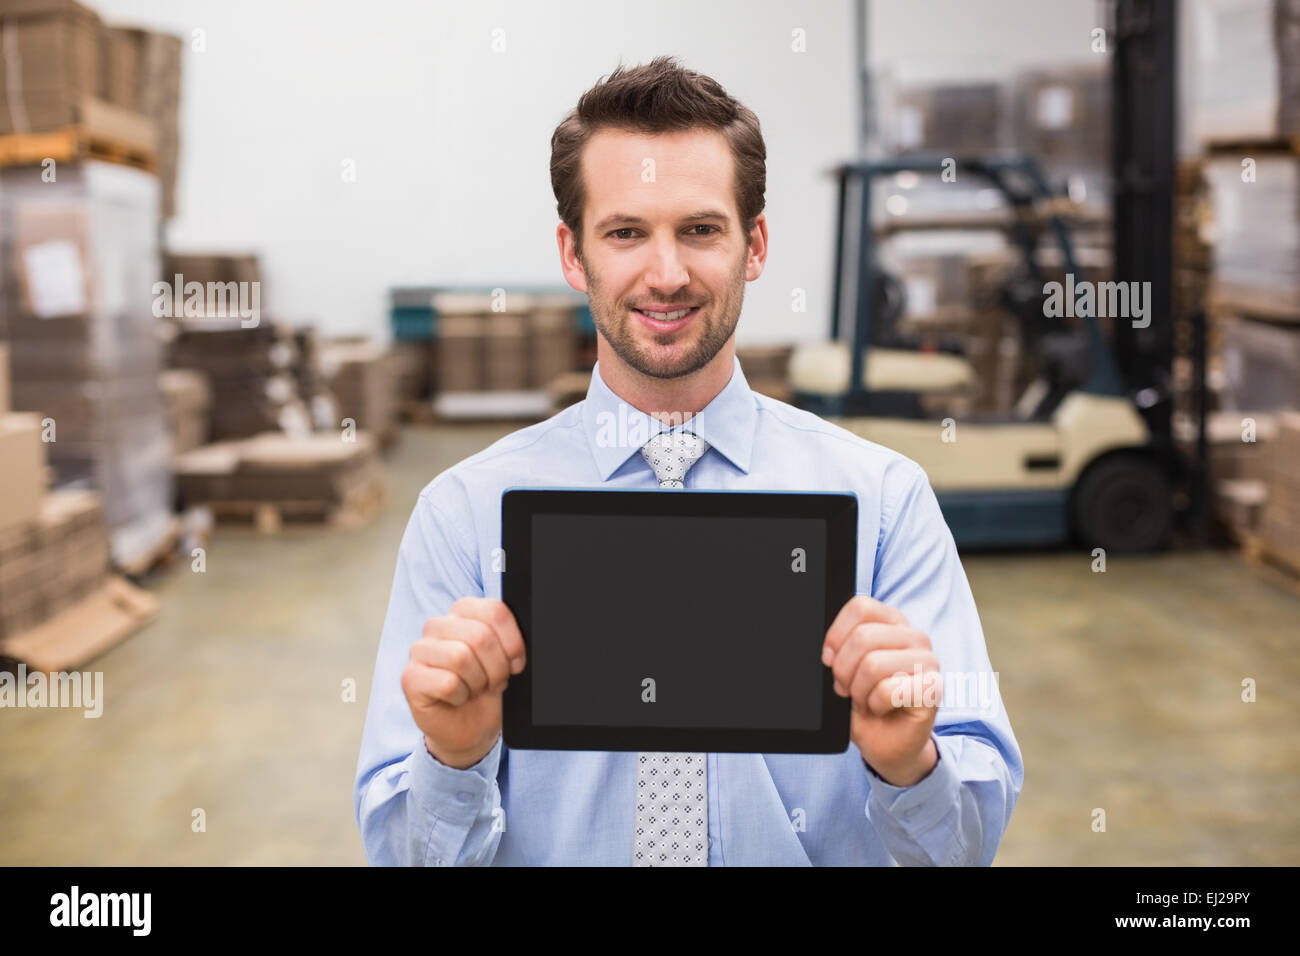 Warehouse manager showing tablet pc smiling at camera Stock Photo